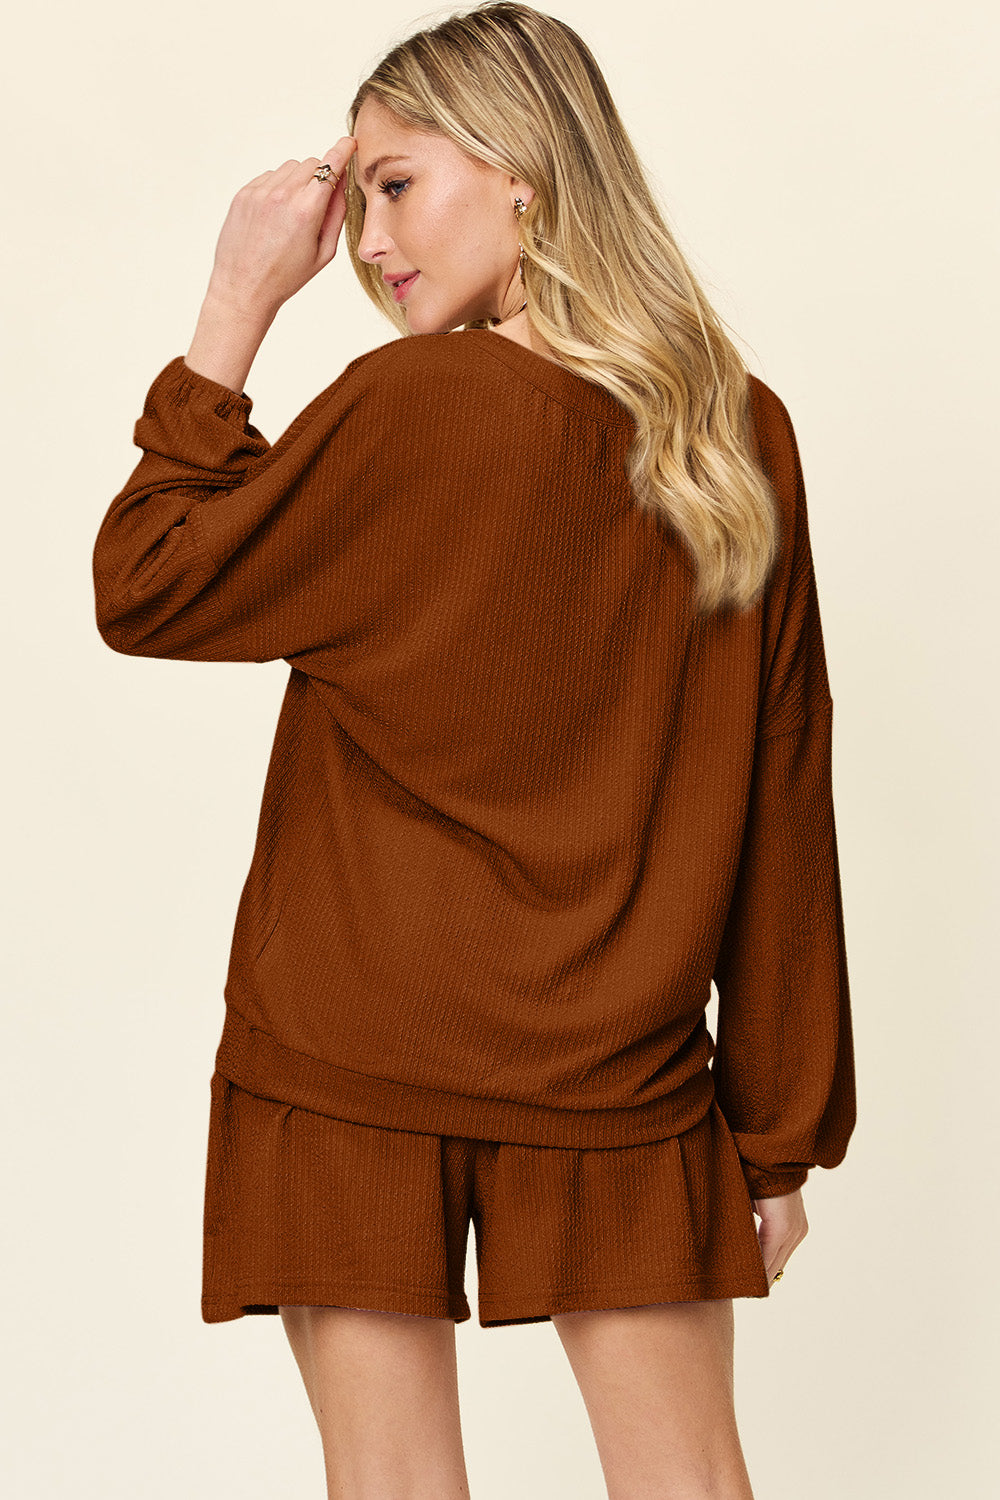 Double Take Texture V-Neck Long Sleeve T-Shirt and Shorts Set